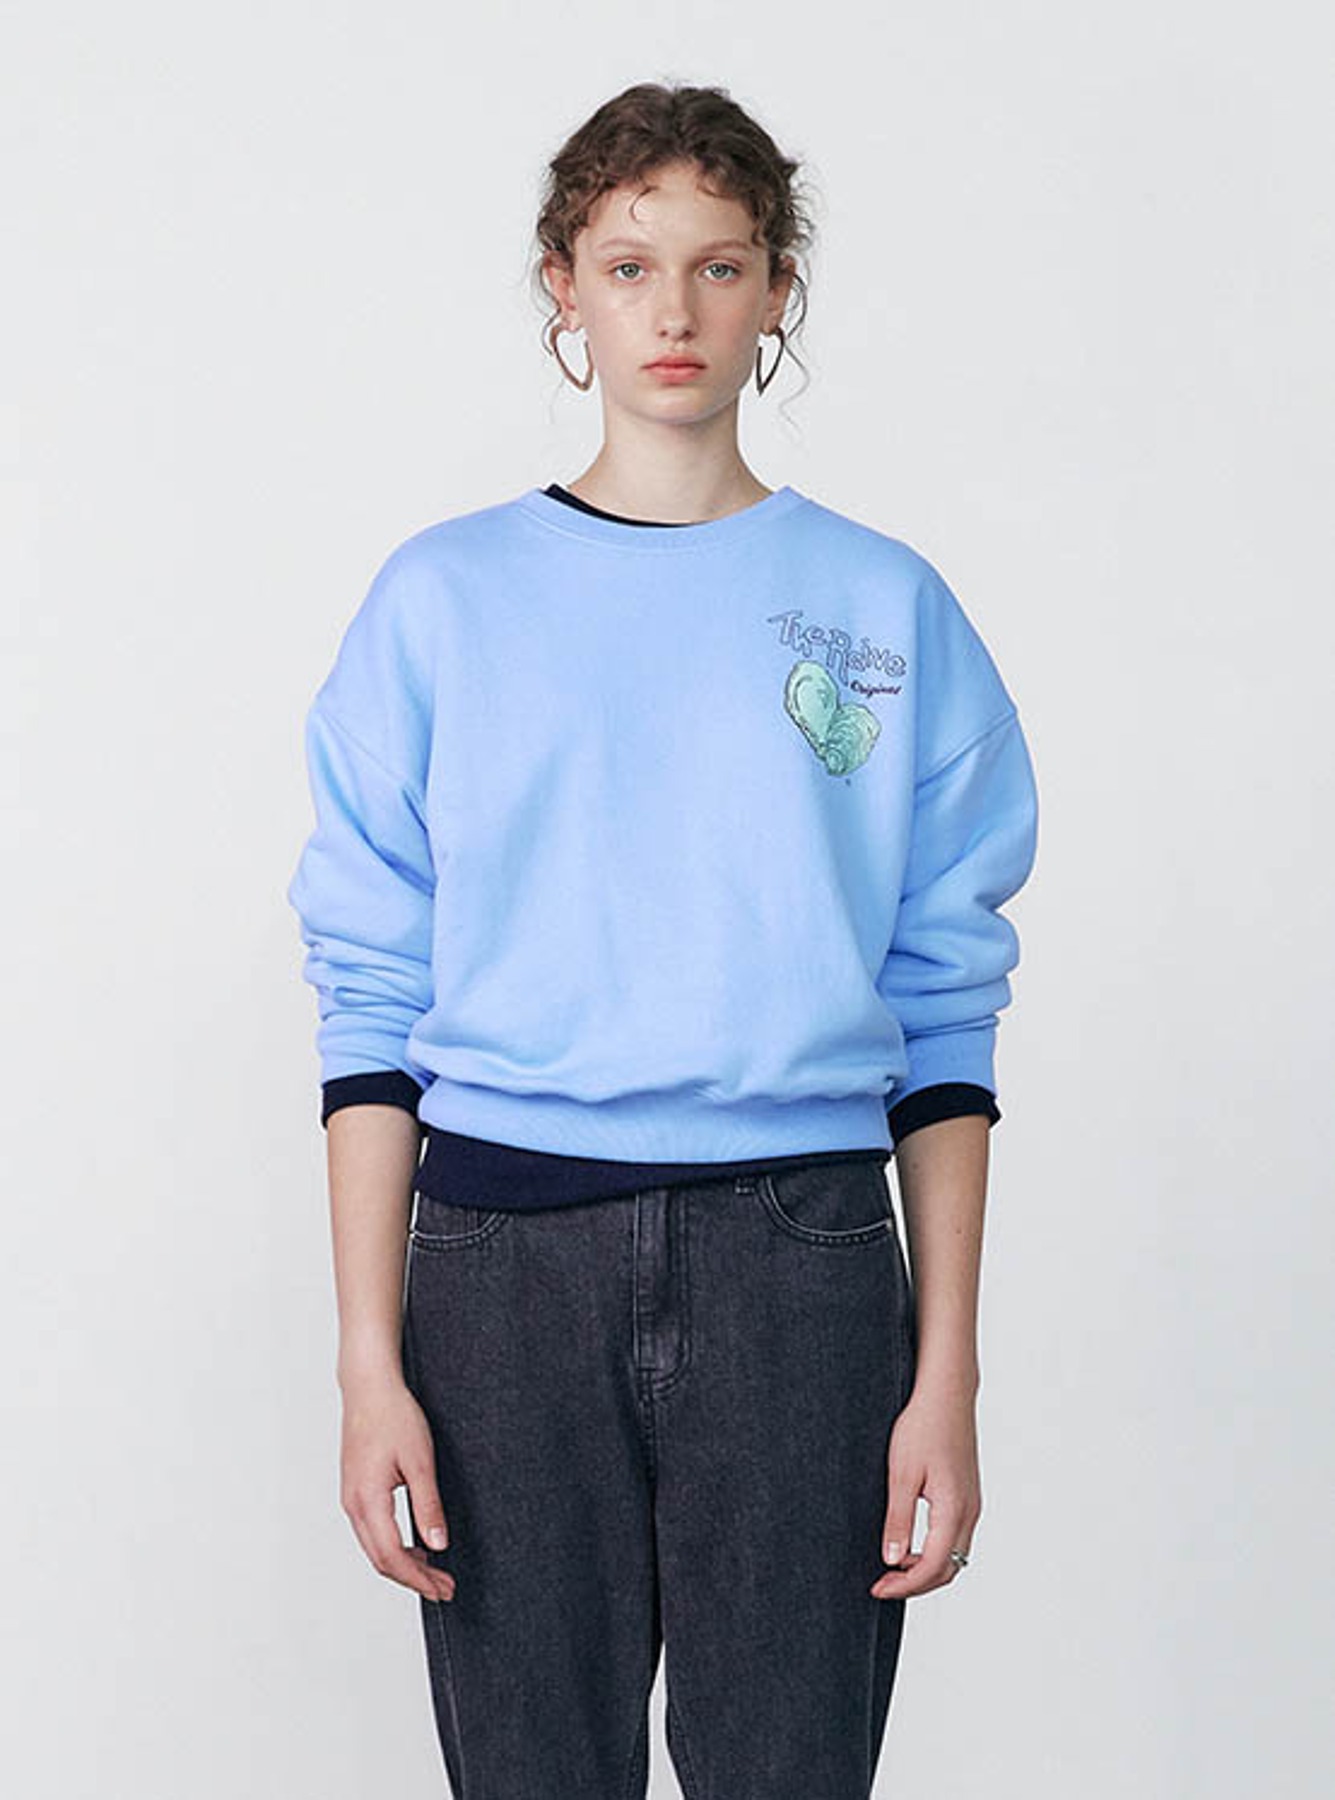 The Shell Heart Graphic Sweatshirt in Blue VW3AE108-22